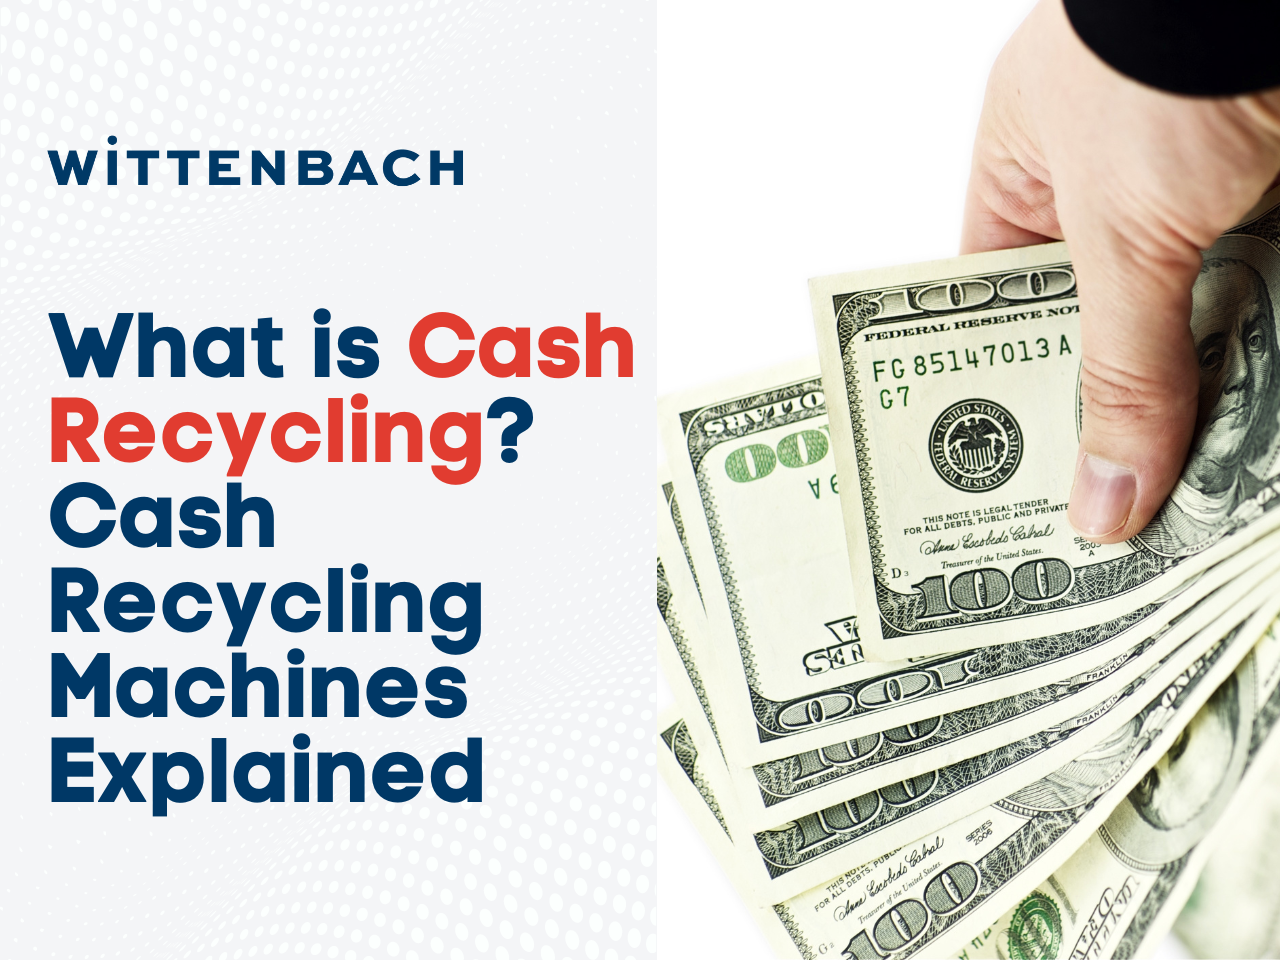 What is Cash Recycling